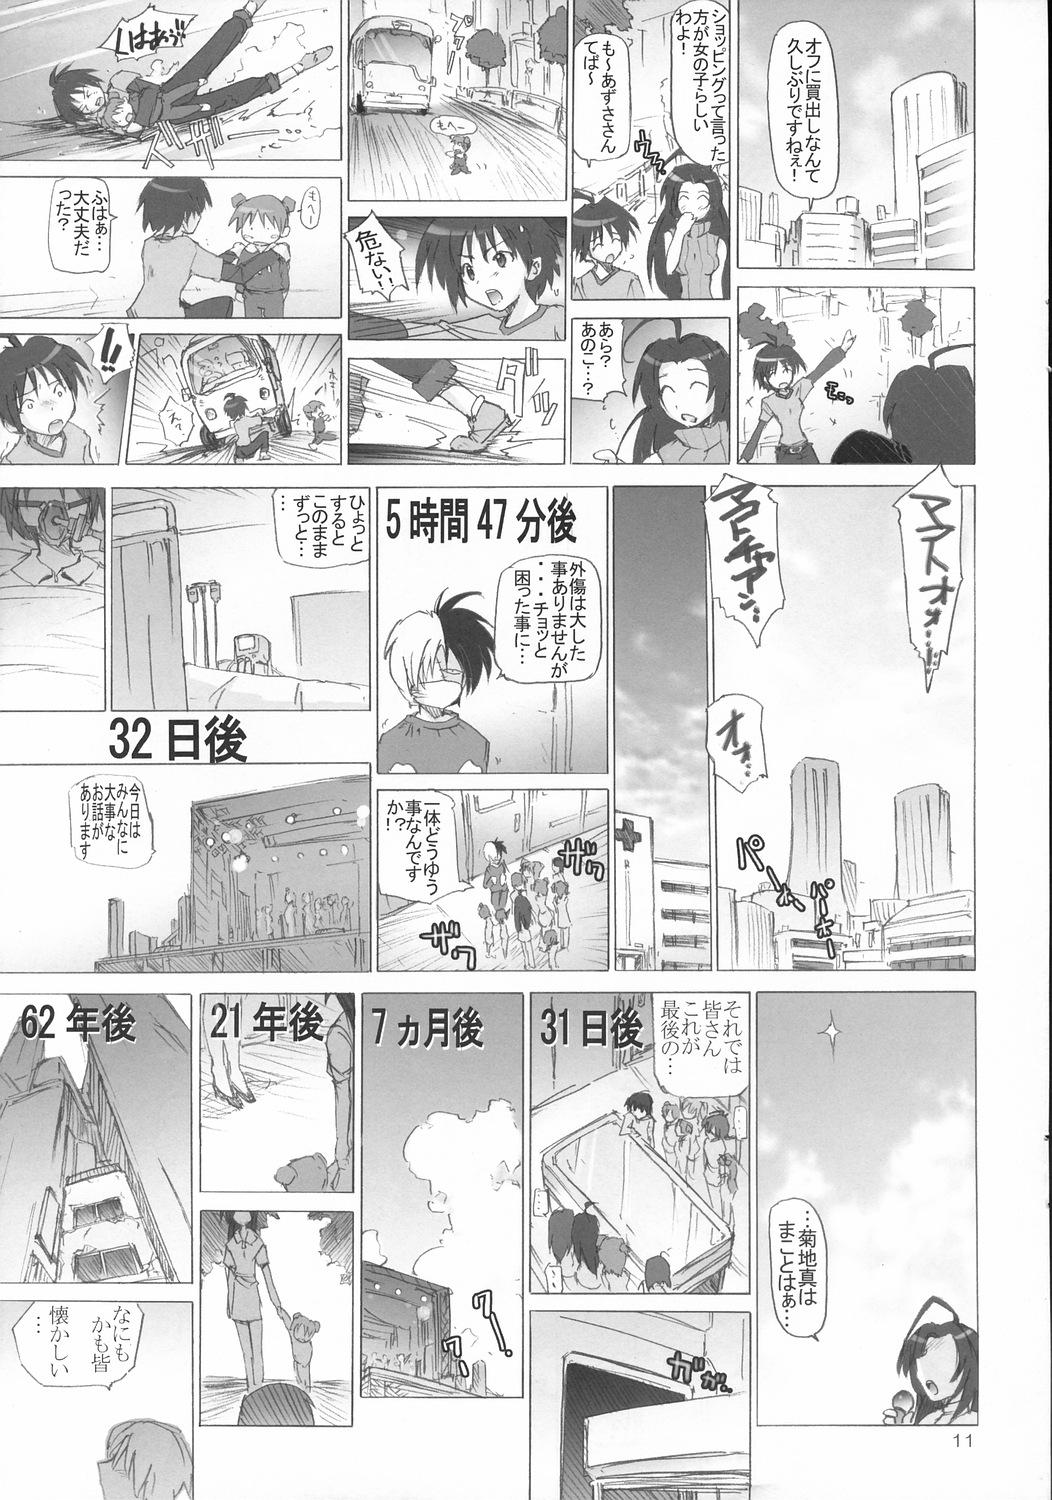 Chat M@KOTO STYLE - The idolmaster Harcore - Page 10